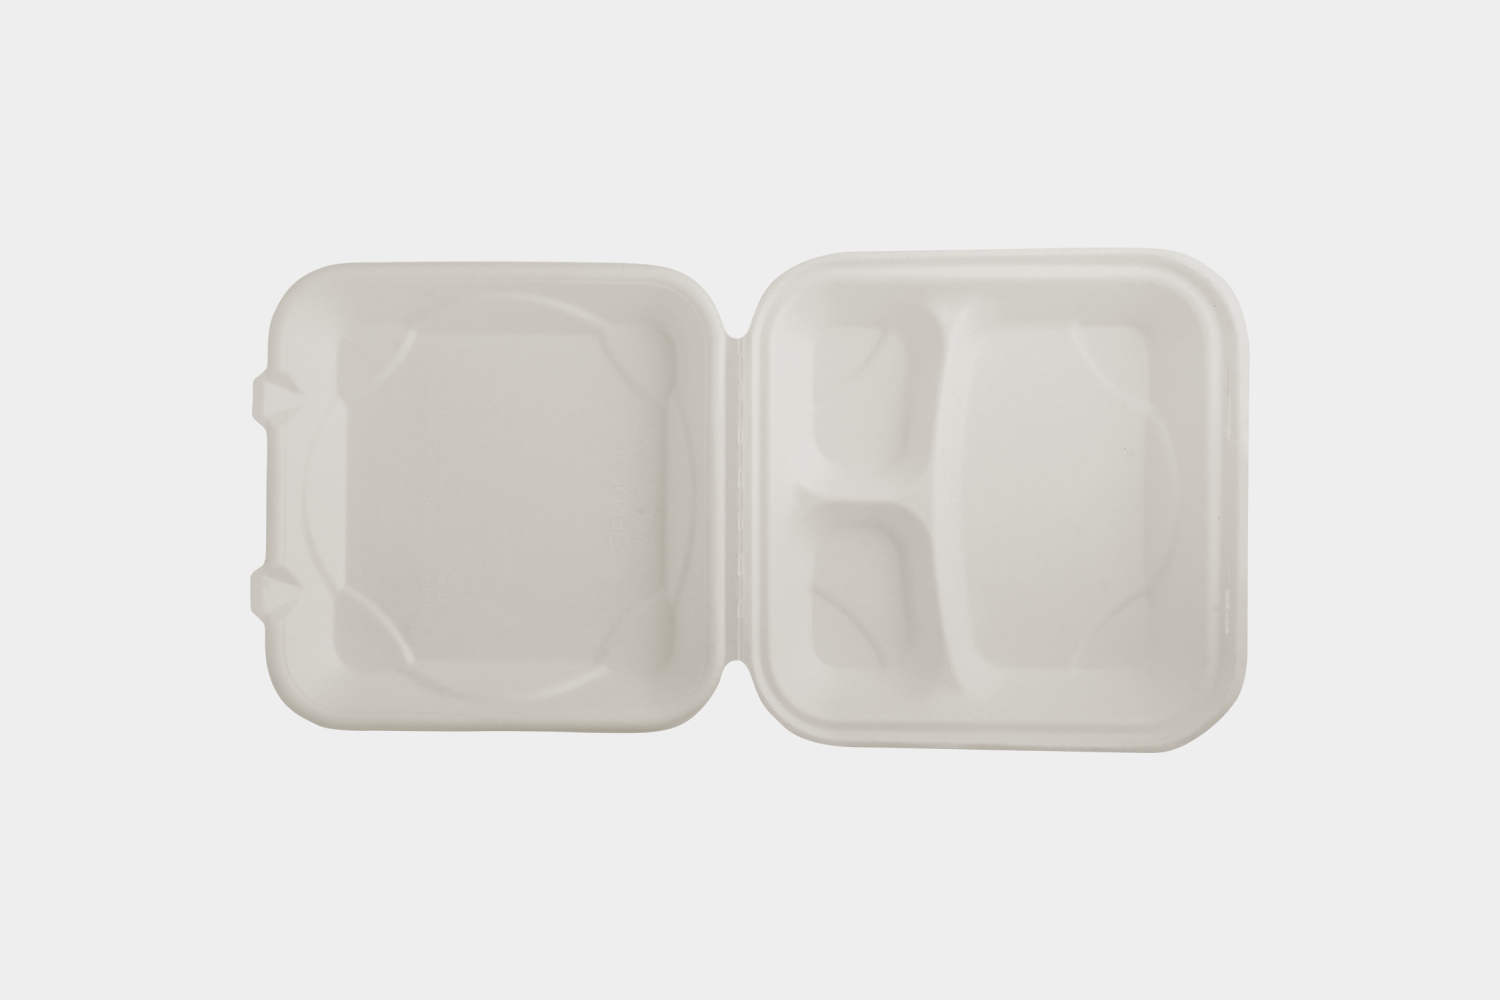 https://www.ecolates.com/wp-content/uploads/2023/02/3-compartments-9-inch-sugarcane-bagasse-takeout-box-with-hinged-lid-container-bottom-view.jpg